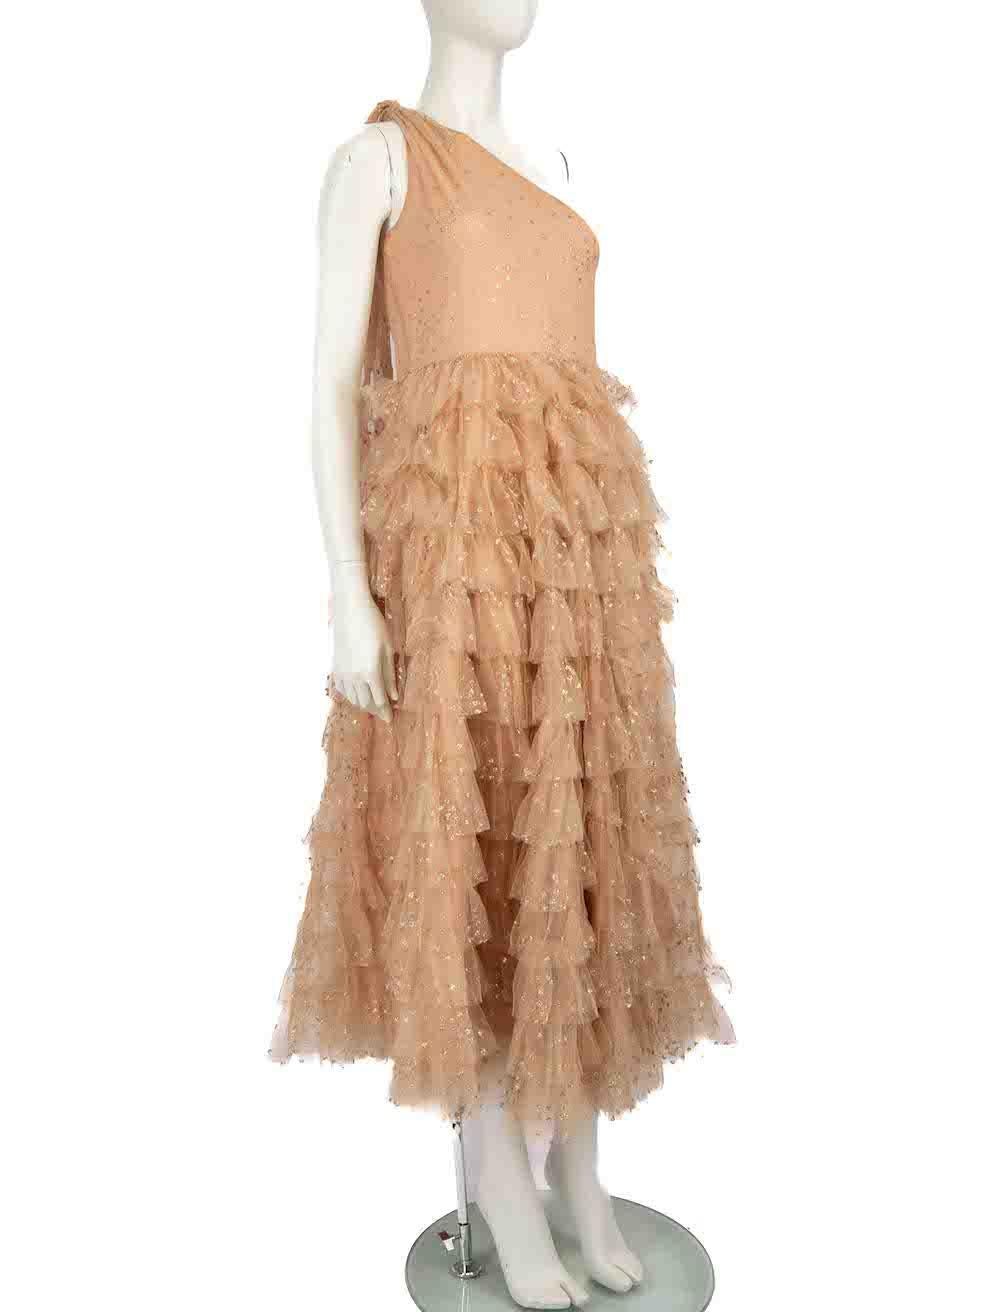 CONDITION is Very good. Hardly any visible wear to dress is evident on this used Valentino Garavani designer resale item.
 
 
 
 Details
 
 
 Beige
 
 Synthetic
 
 Dress
 
 Gold glitter heart pattern
 
 One shoulder
 
 Sleeveless
 
 Tiered ruffle